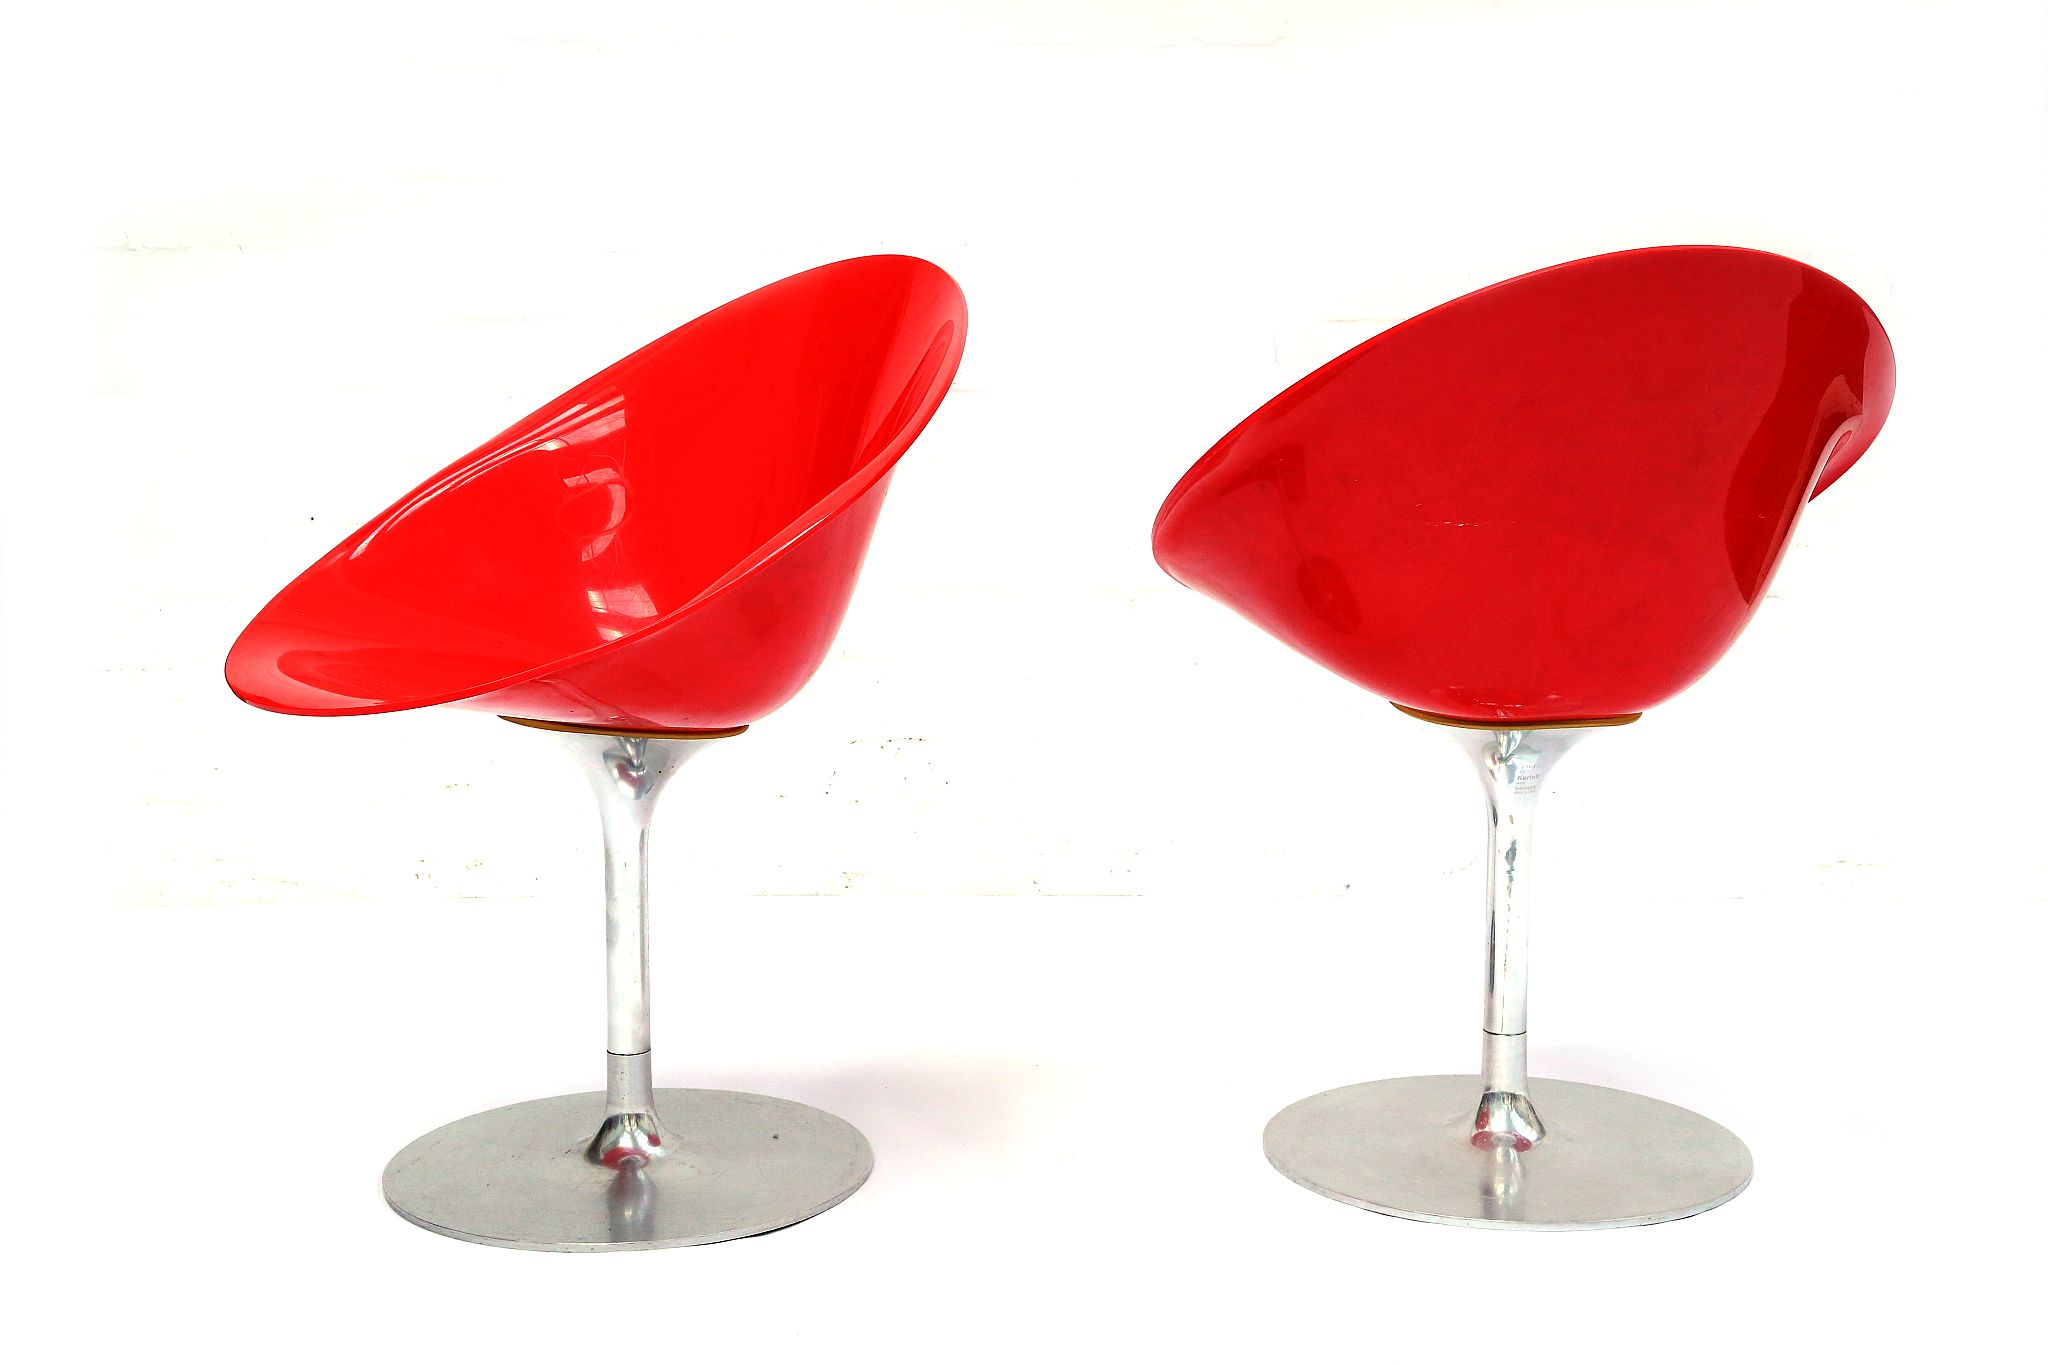 A PAIR OF EROS CHAIRS, DESIGNED BY PHILIPPE STARCK, MANUFACTURED BY KARTELL, red polycarbonate seats - Image 3 of 4